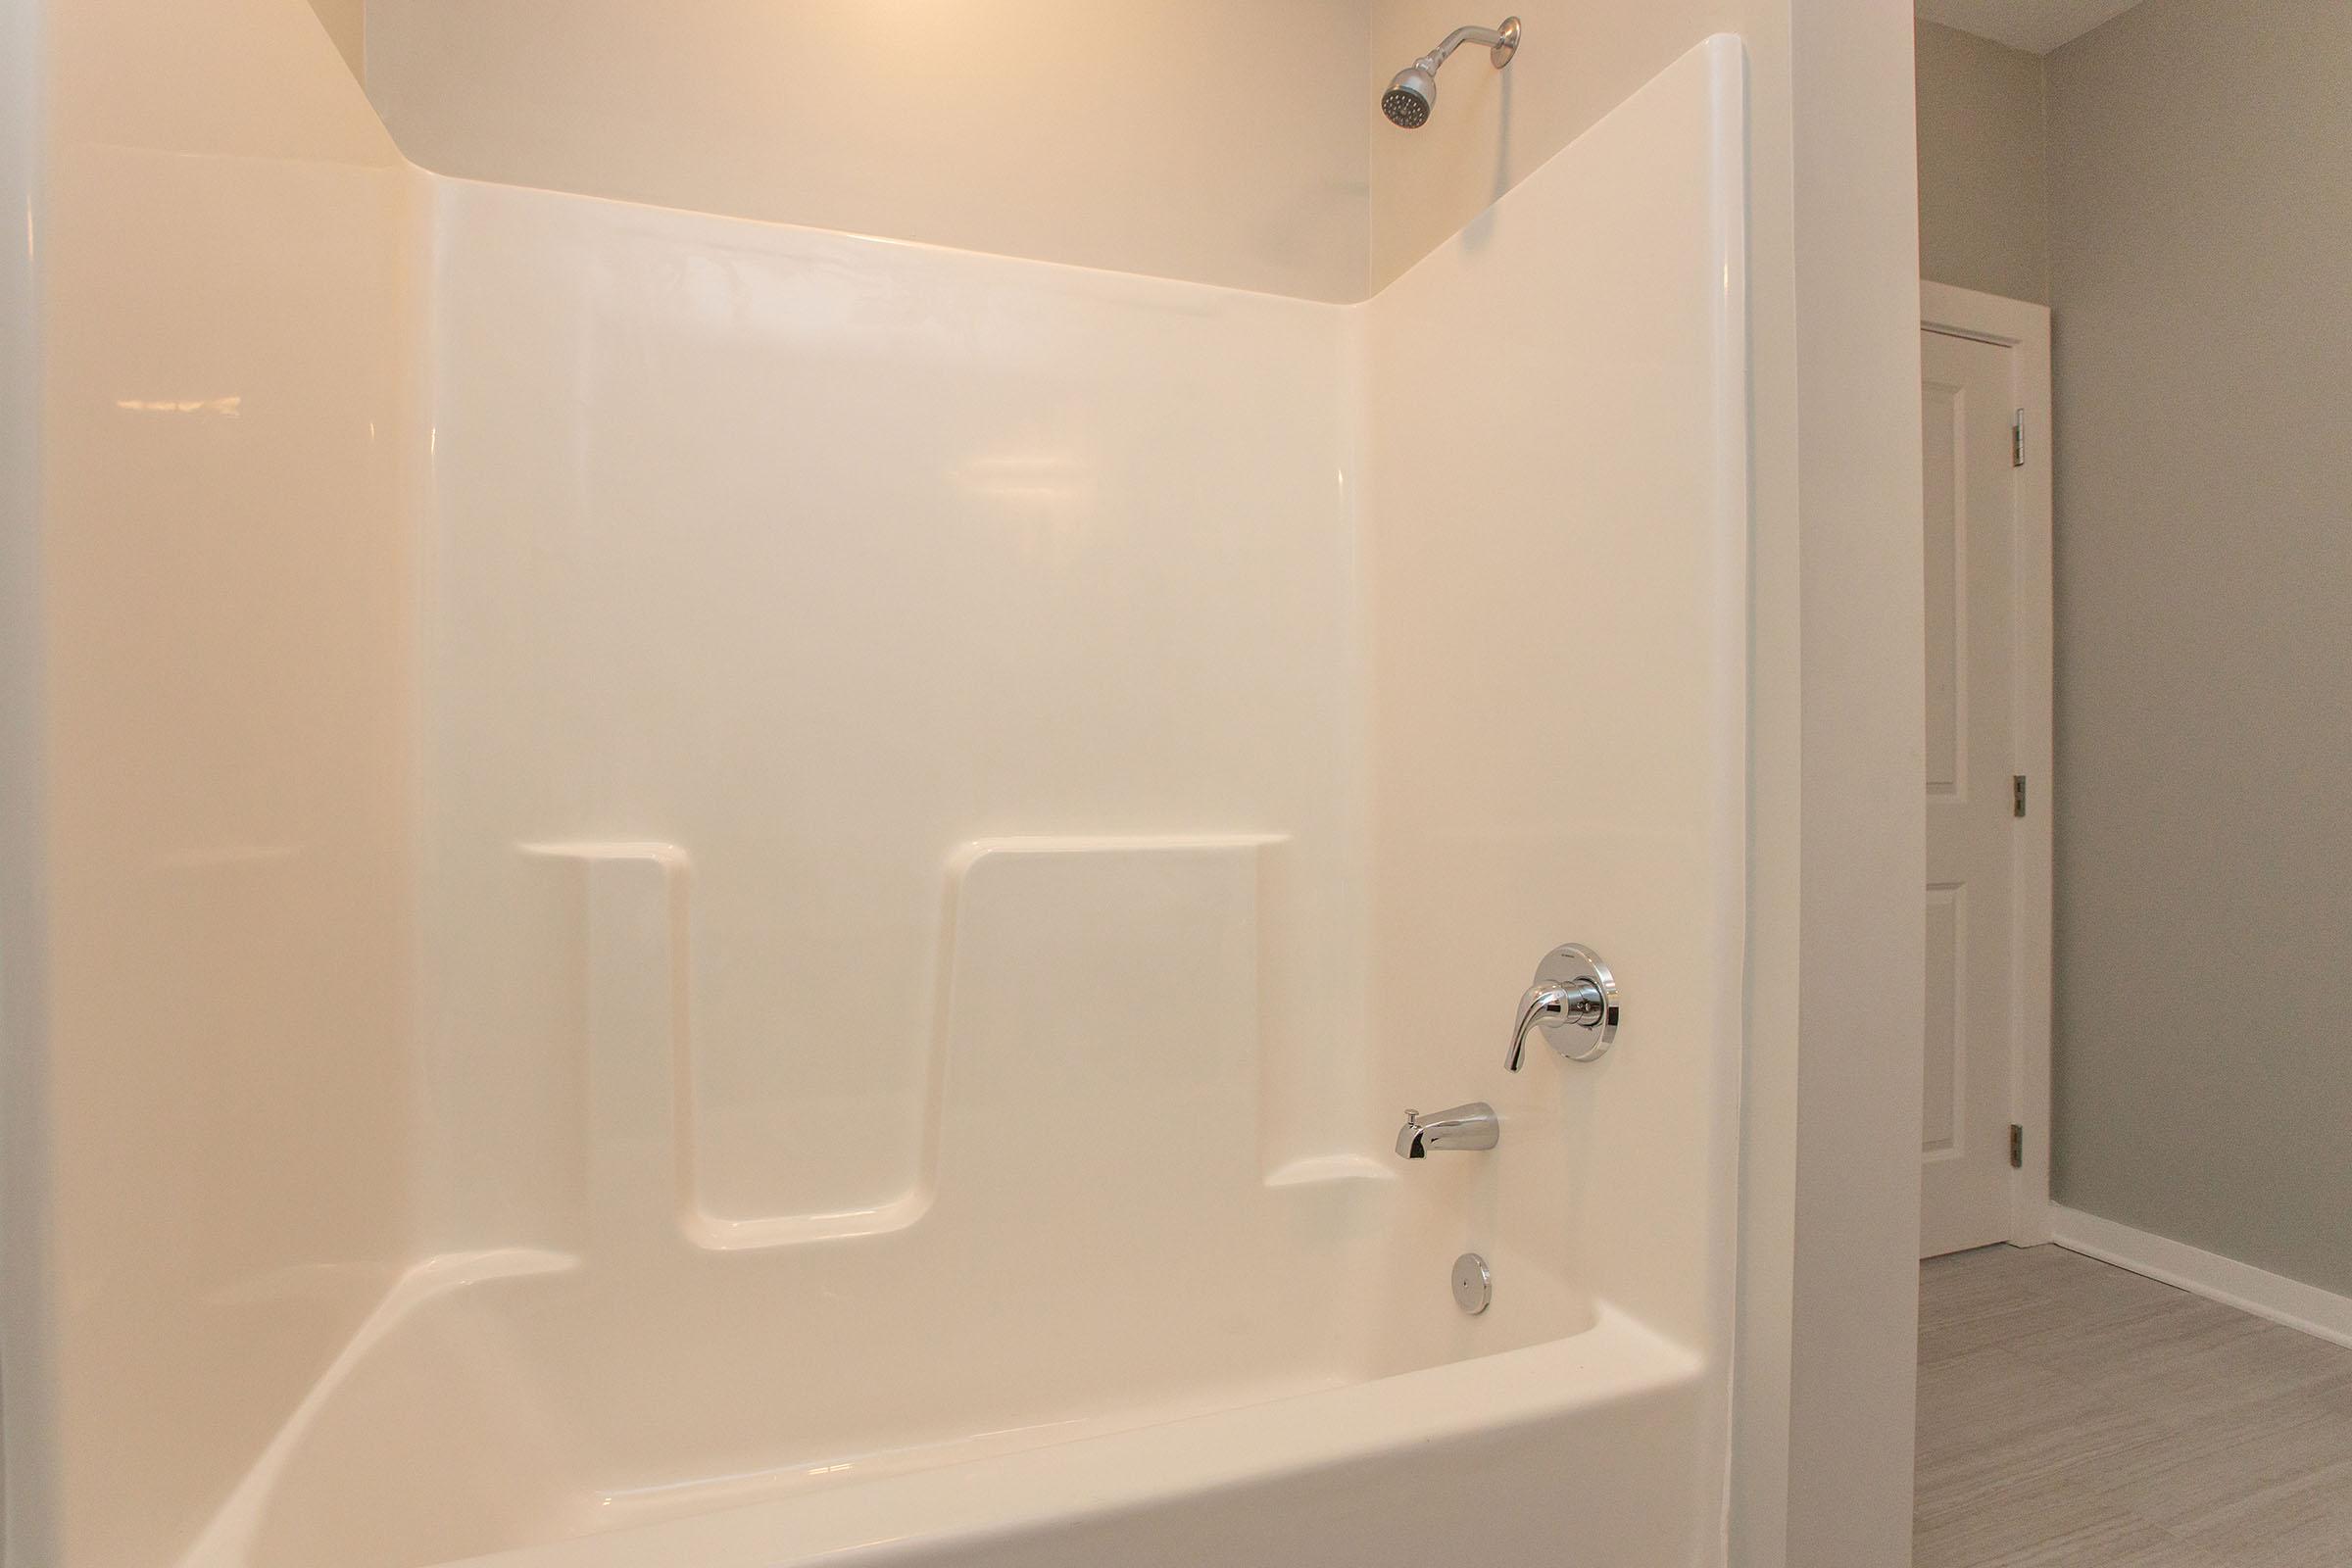 a close up of a white tub sitting next to a shower